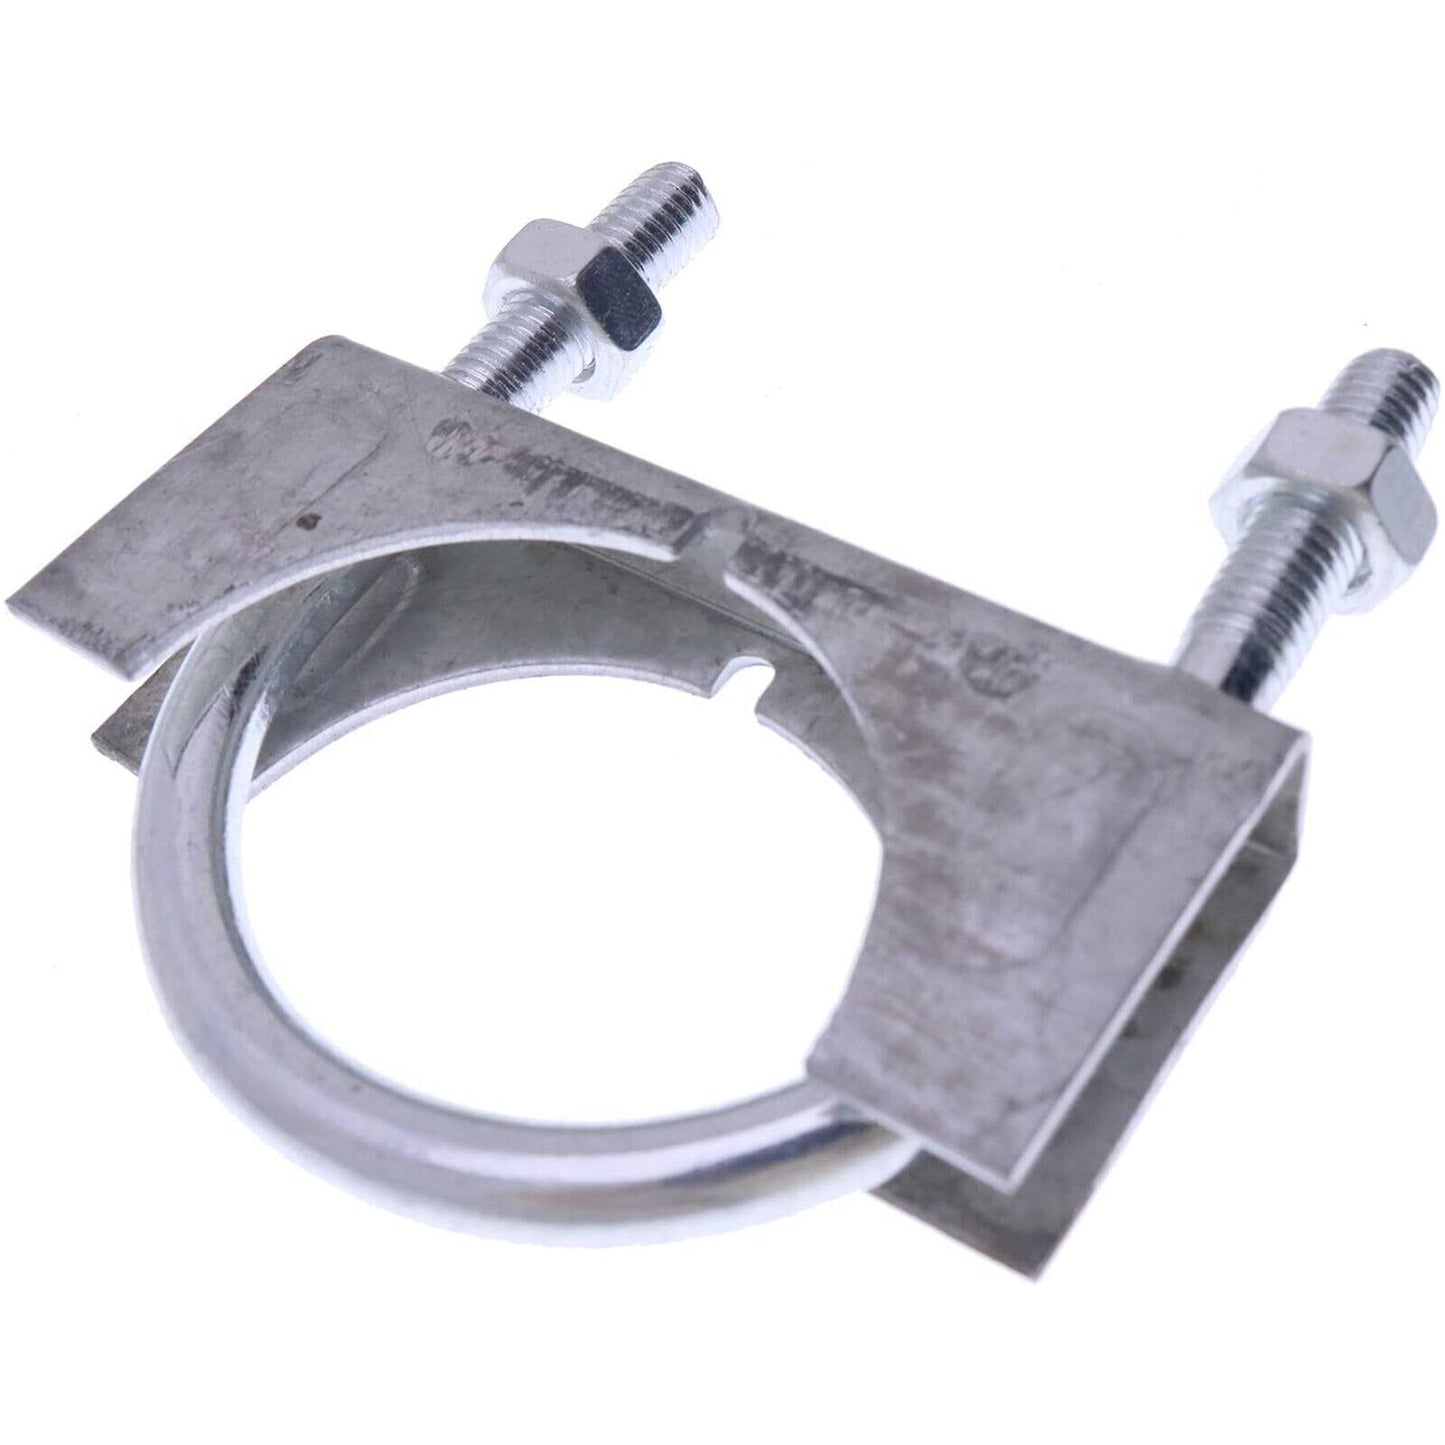 6677363 Exhaust Muffler Clamp Compatible With Bobcat 751 753 763 773 7753 S130 S150